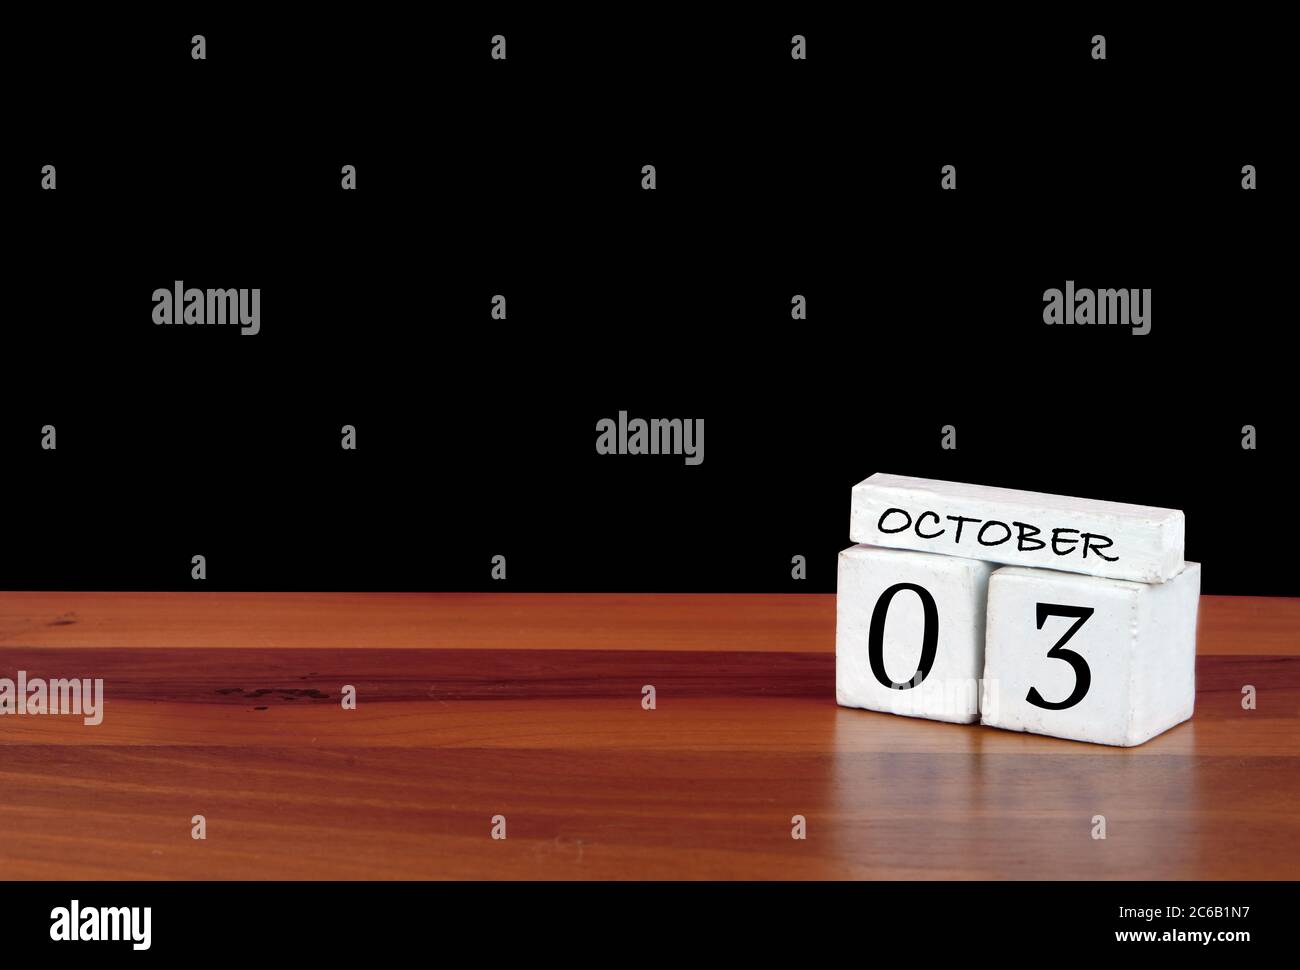 3 October calendar month. 3 days of the month. Reflected calendar on wooden floor with black background Stock Photo